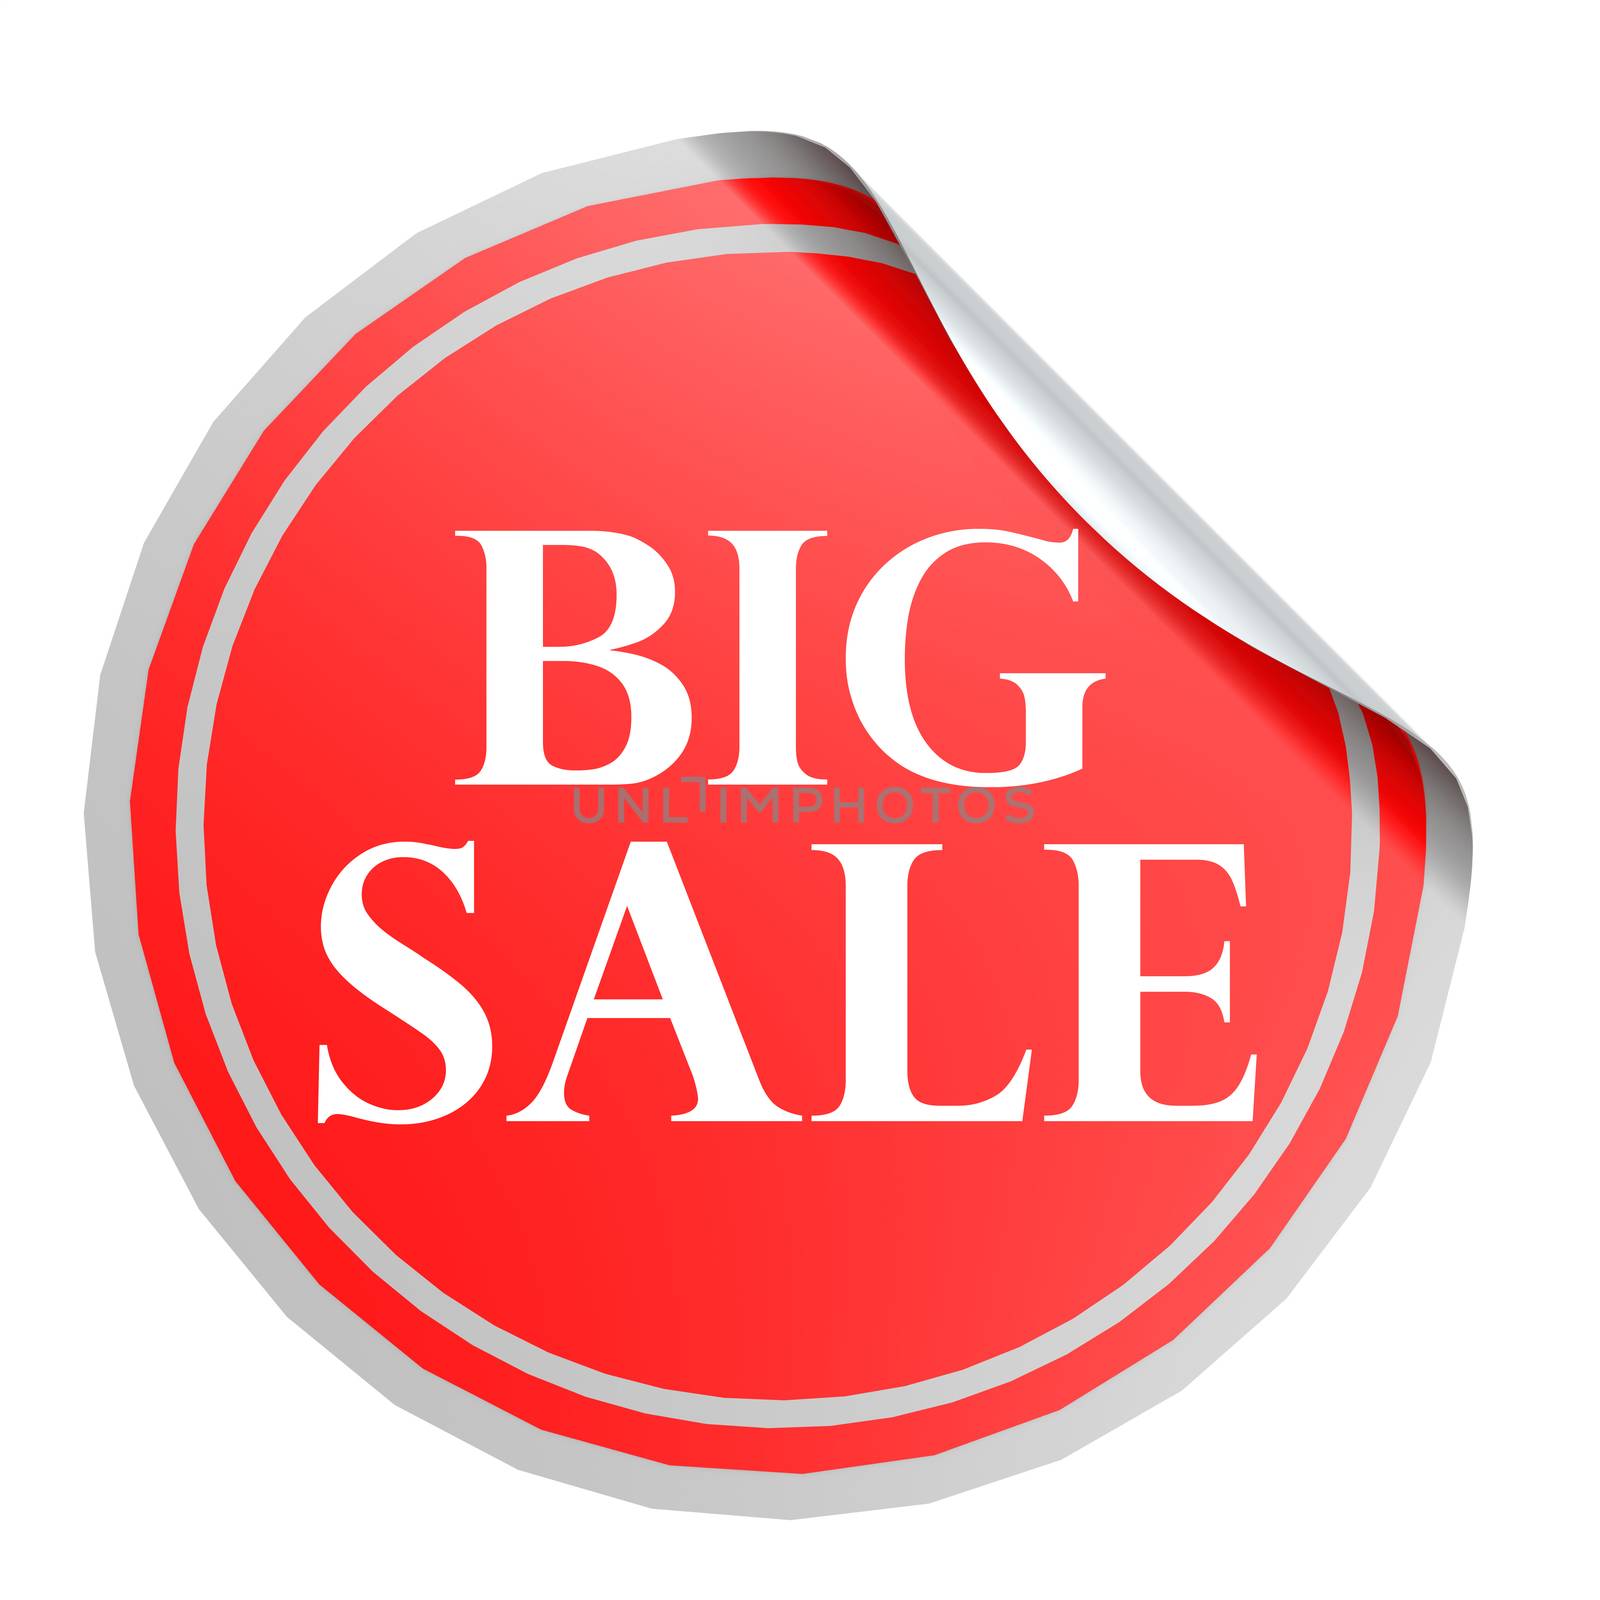 Big sale red circle label by tang90246